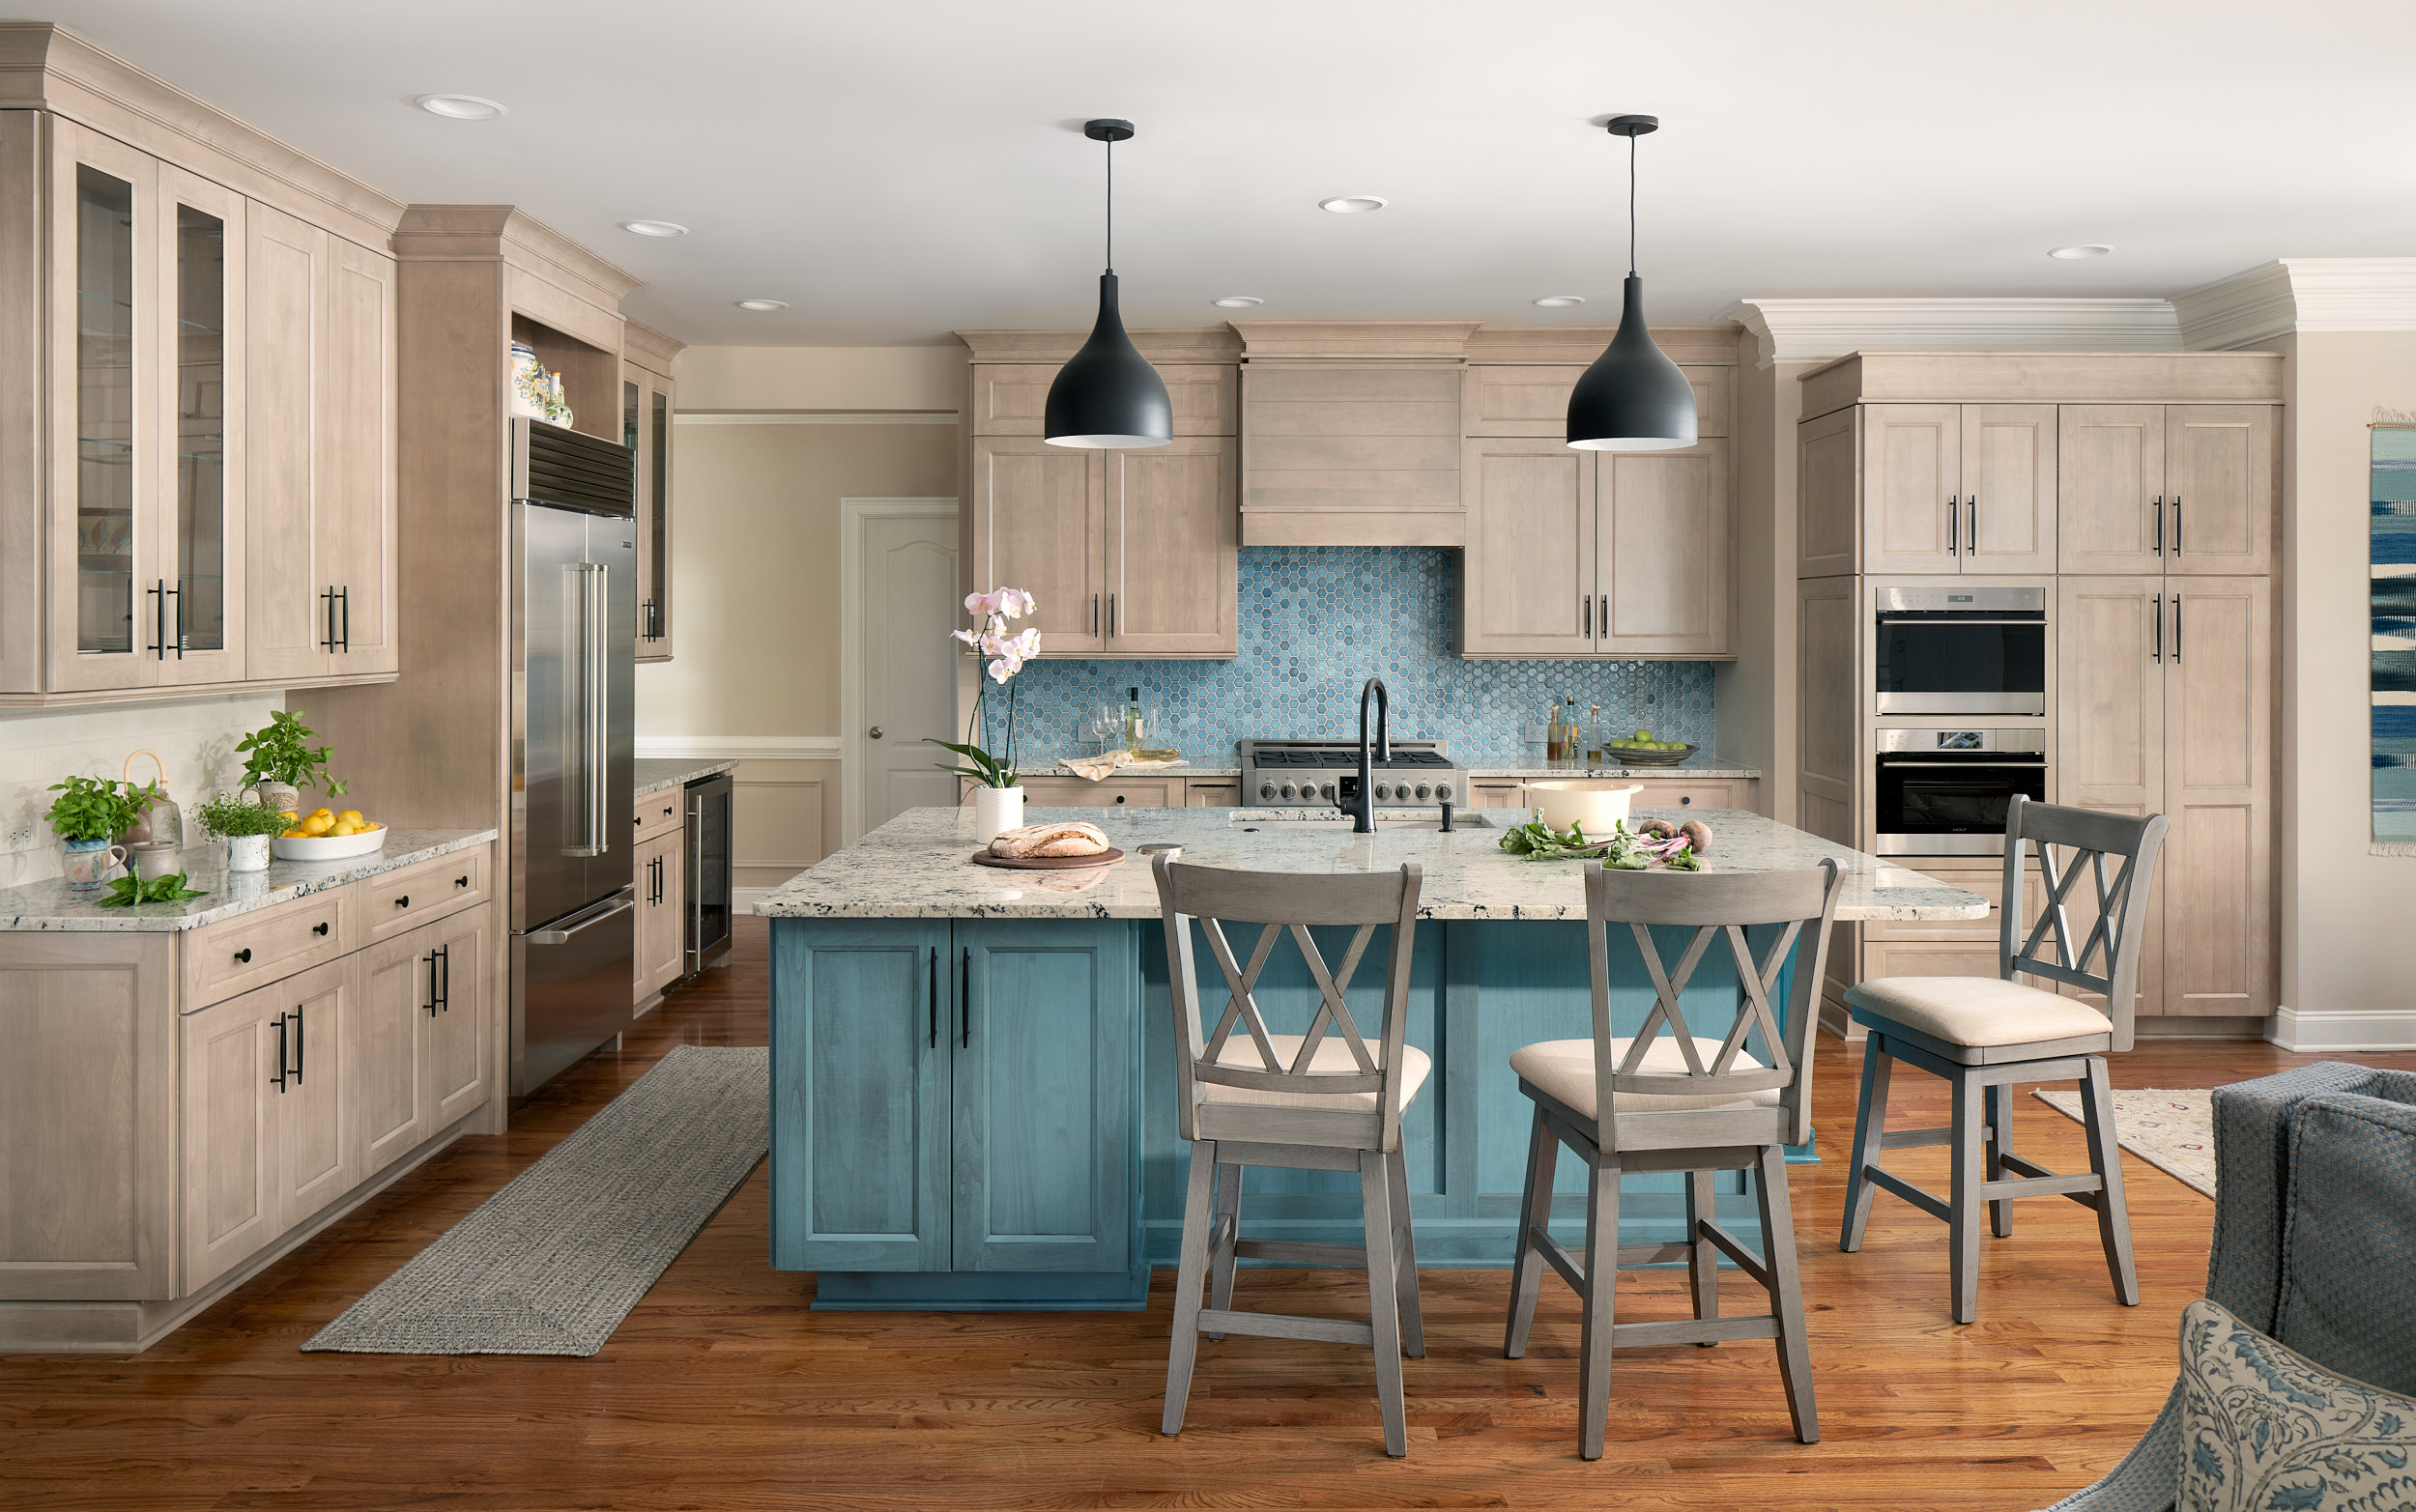 Shiloh cabinetry